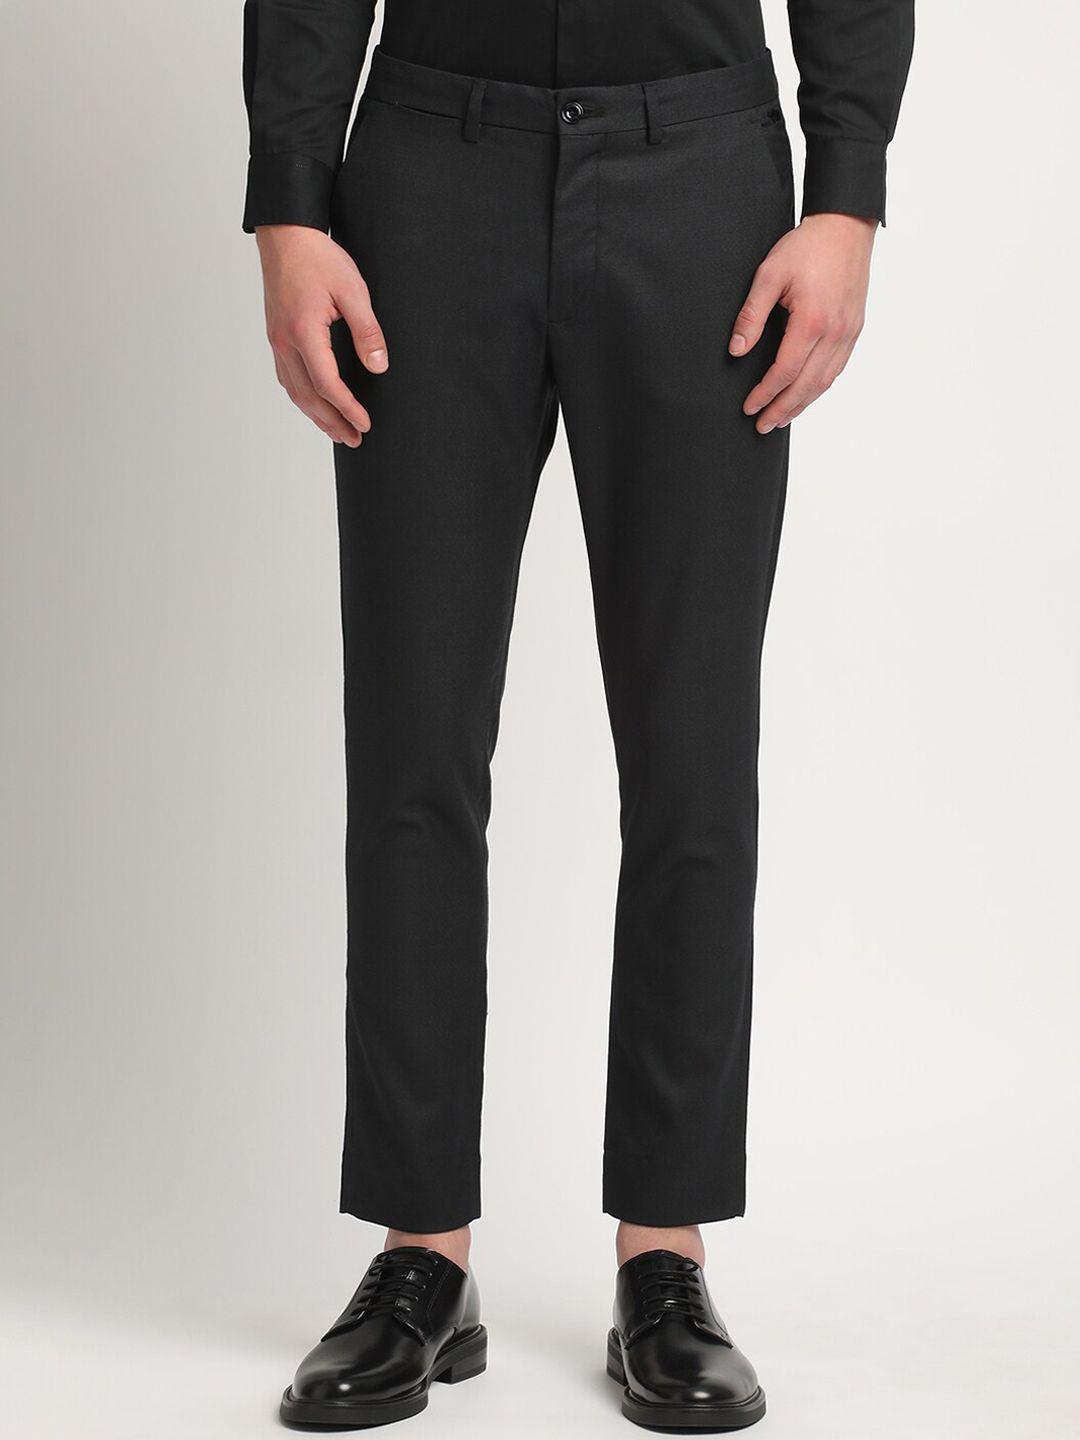 THE BEAR HOUSE Men Slim Fit Formal Trousers